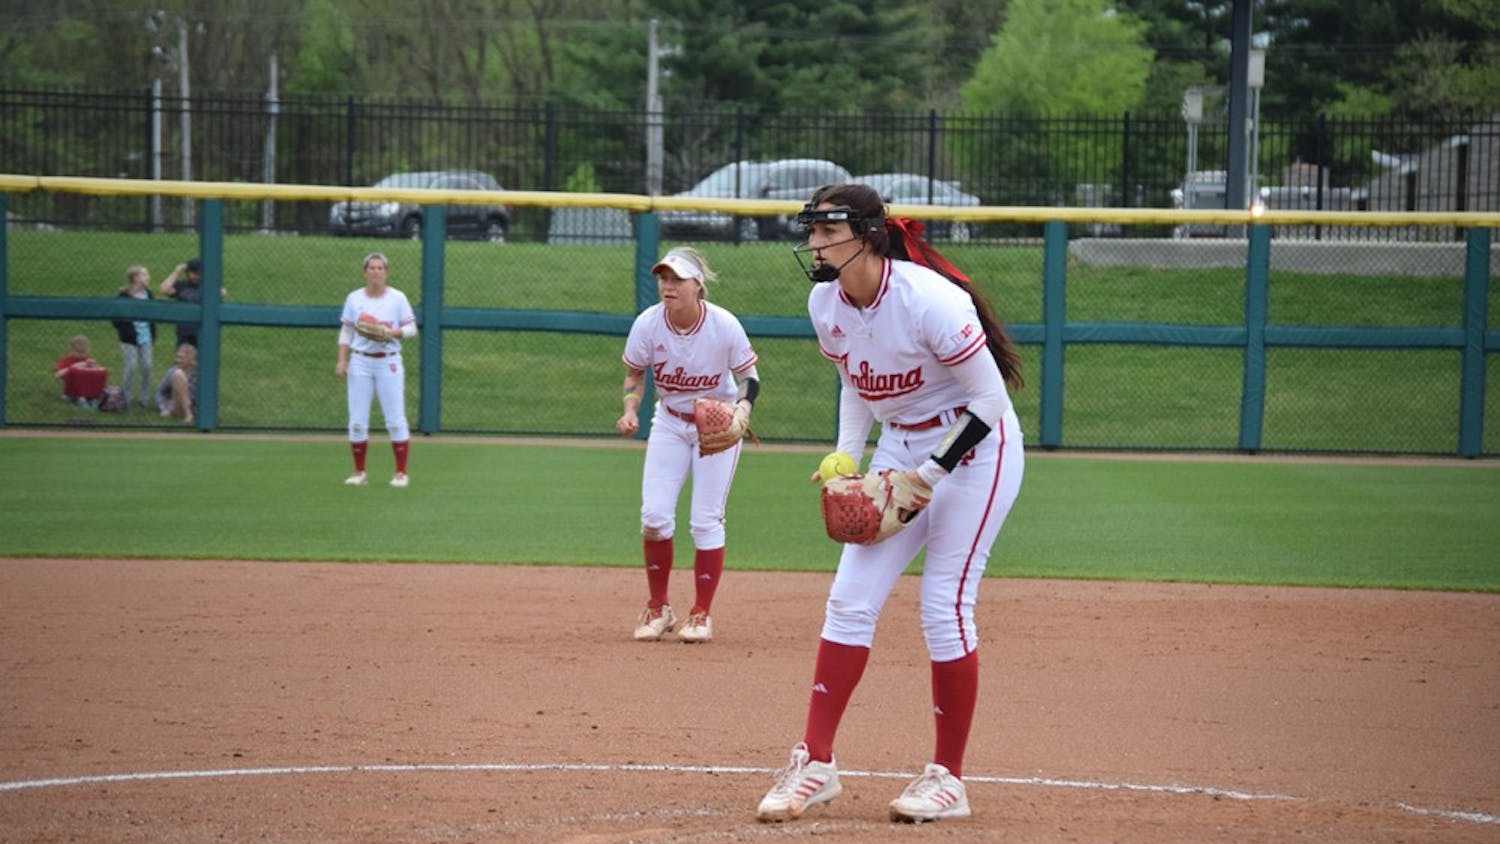 Sophomore pitcher Emily Kirk focuses on the strike zone while shortstop Rachel O'Malley prepares for a play in the background.&nbsp;The Hoosiers defeated the Terrapins in all three games in Bloomington.